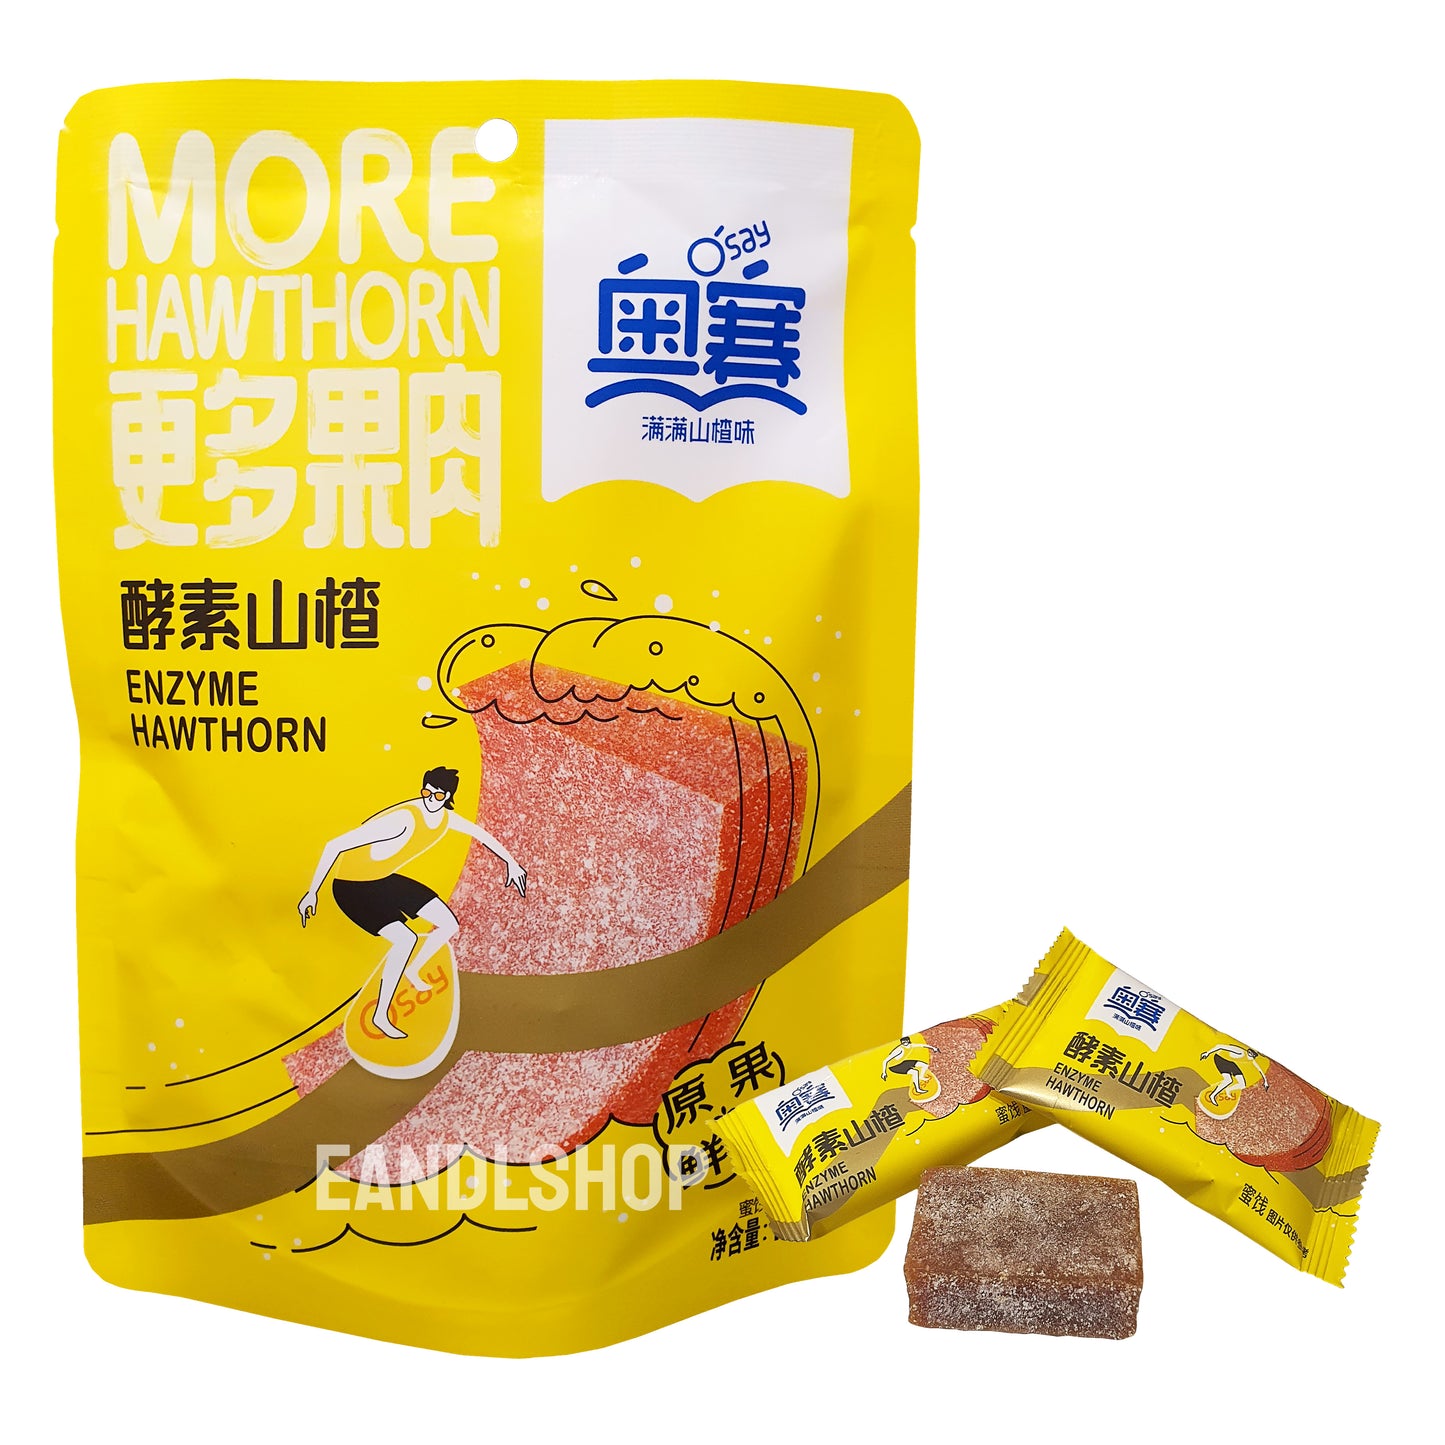 Enzyme Hawthorn. Old-school biscuits, modern snacks (chips, crackers), cakes, gummies, plums, dried fruits, nuts, herbal tea – available at www.EANDLSHOP.com